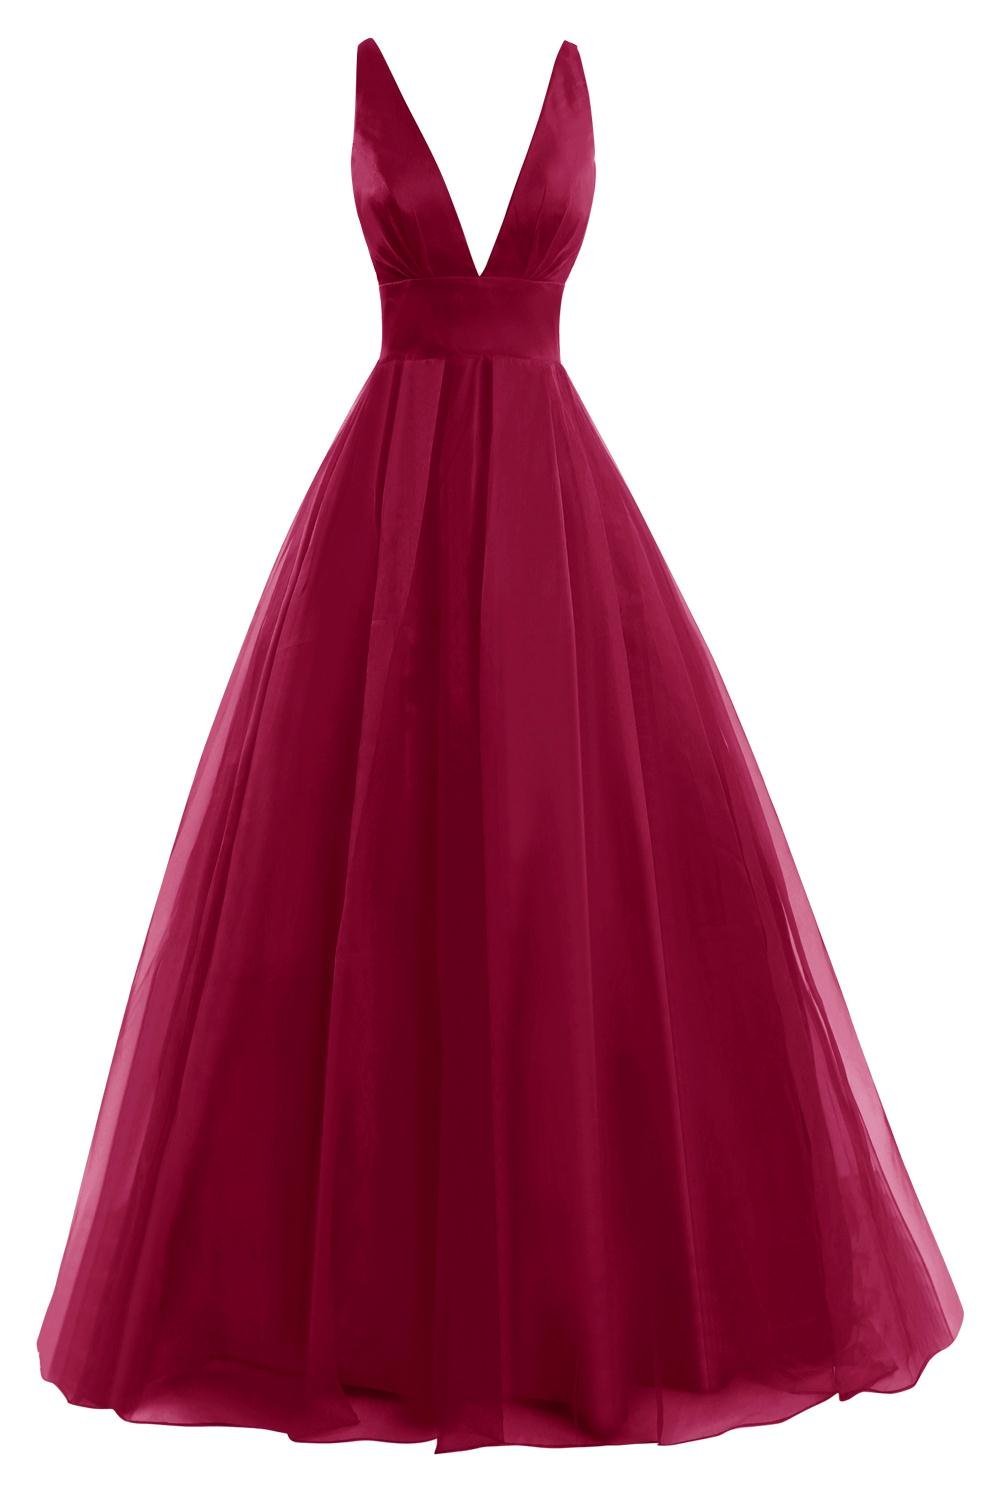 Fashion Sexy Women´s Tulle Deep V Neck Prom Dress Formal Evening Gowns